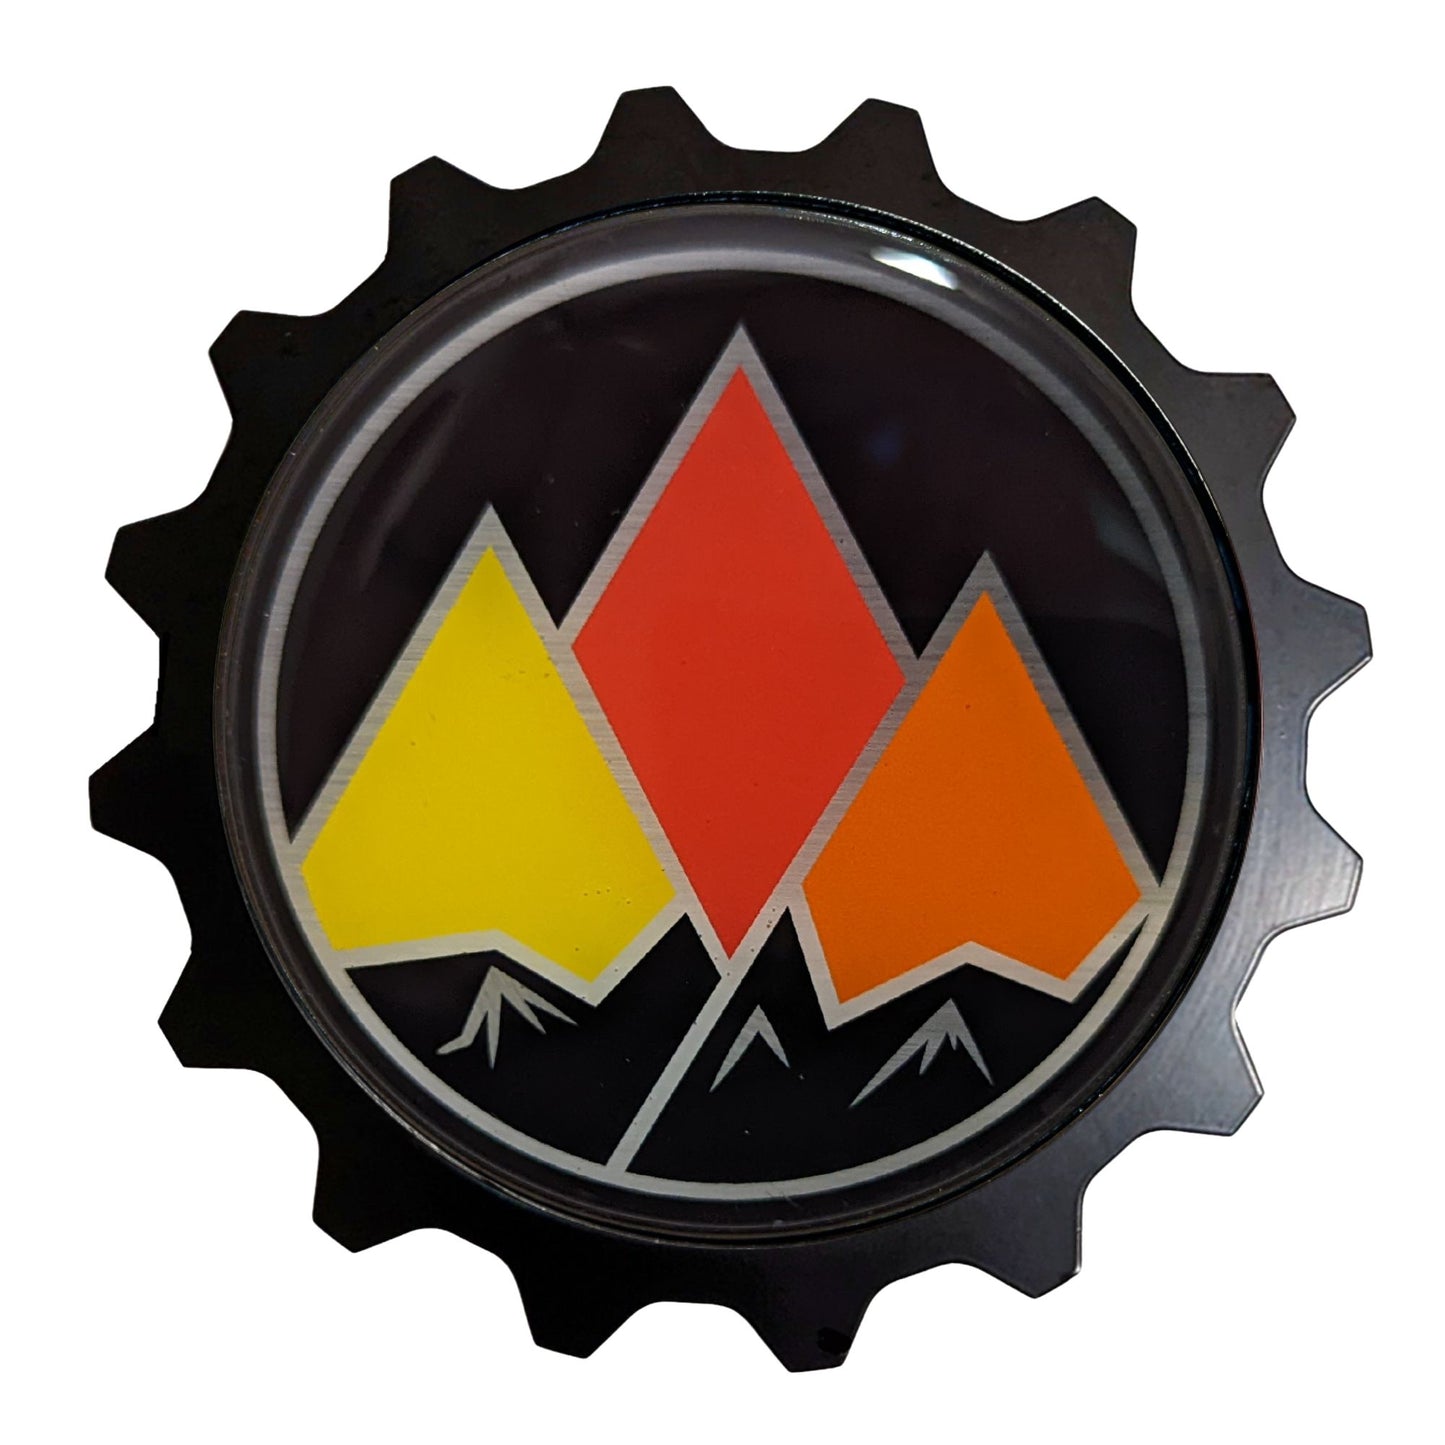 Visit www.thegrillebadgestore.com Huge Collection of Badges! Mountain, Stripe, Retro, Pop Culture & More Standard Grille Badge Mountain Style (Not Acrylic) Aluminum With Resin Center, Full 1 Year Warranty - Blackout emblems and overlays are popular, but add a splash of color to your grille badge on Tacoma, FJ Cruiser, 4Runner, Tundra, Lexus GX and LX, Landcruiser and Domestics like Ram, Jeep, Ford and Chevy). We have also found Subaru, Nissan Frontier and Titan owners love our grille badges! TEQ